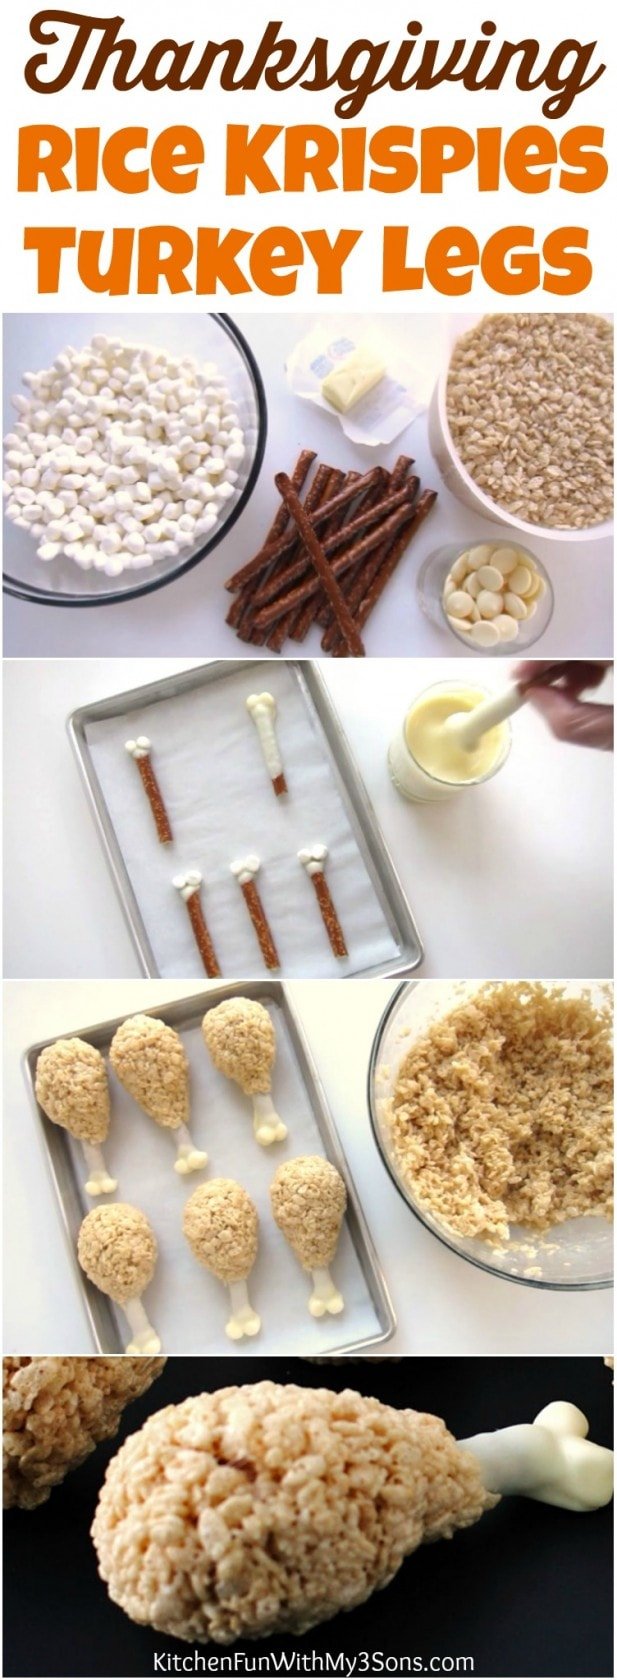  Rice Krispies Turkey Legs...such a fun & easy treat to make the Kids for Thanksgiving!